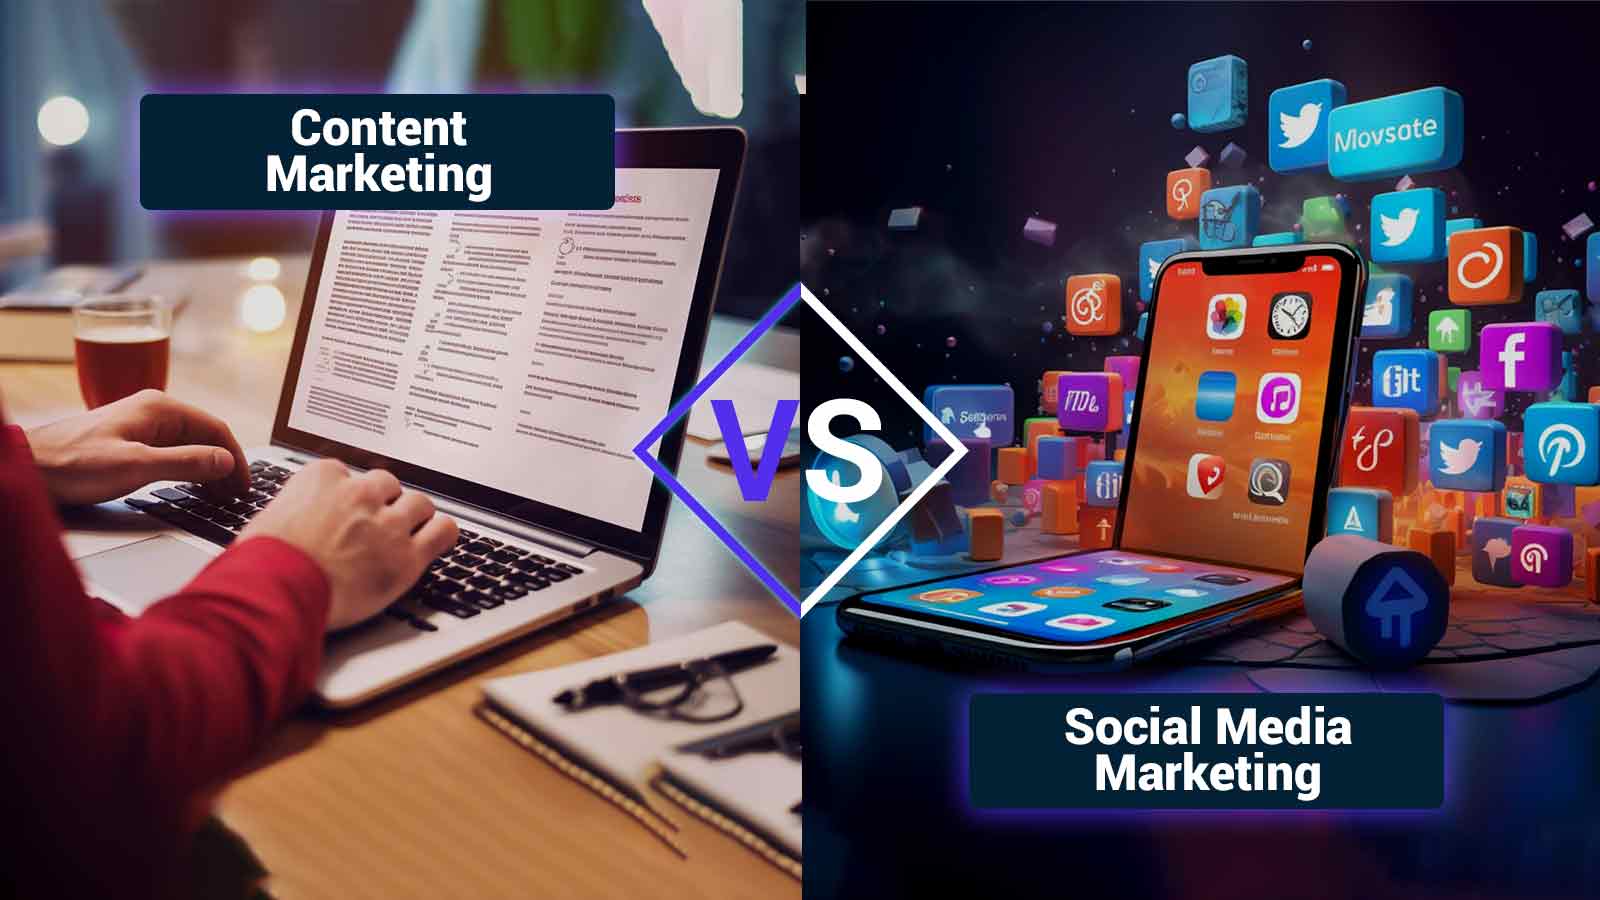 Content Marketing Vs Social Media Marketing: Which Strategy Is More Effective?